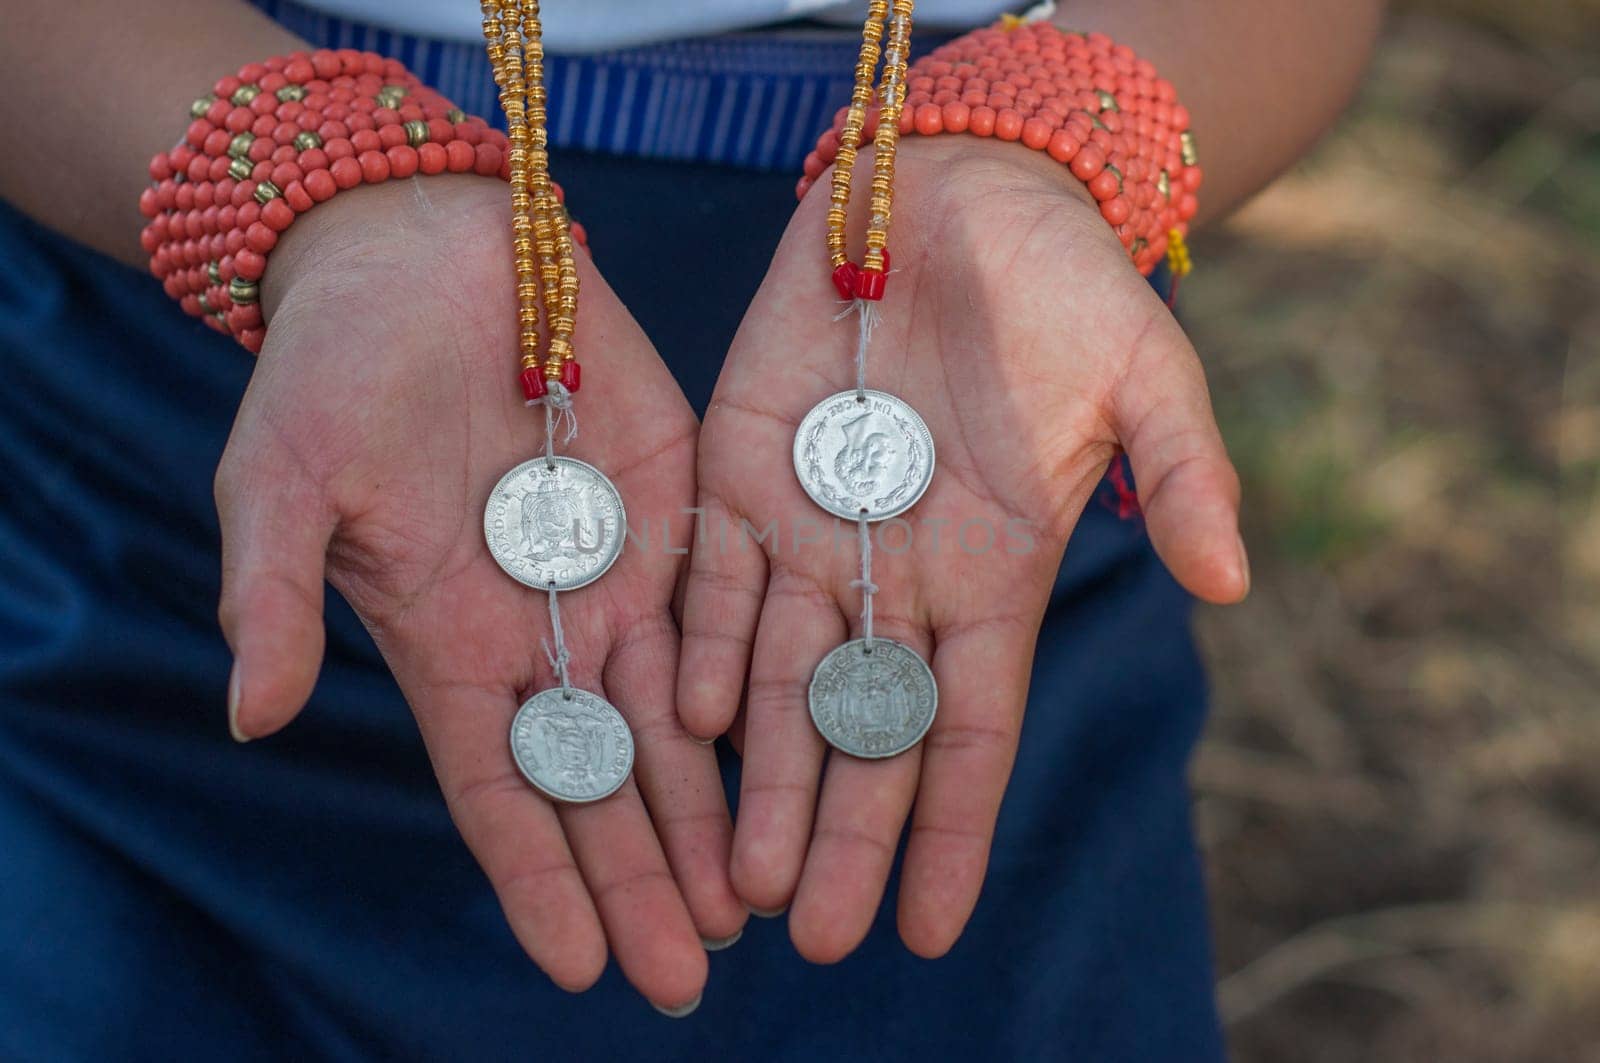 Preserving History: Indigenous Woman Displaying Ecuador's Antique Sucre Coins by Raulmartin